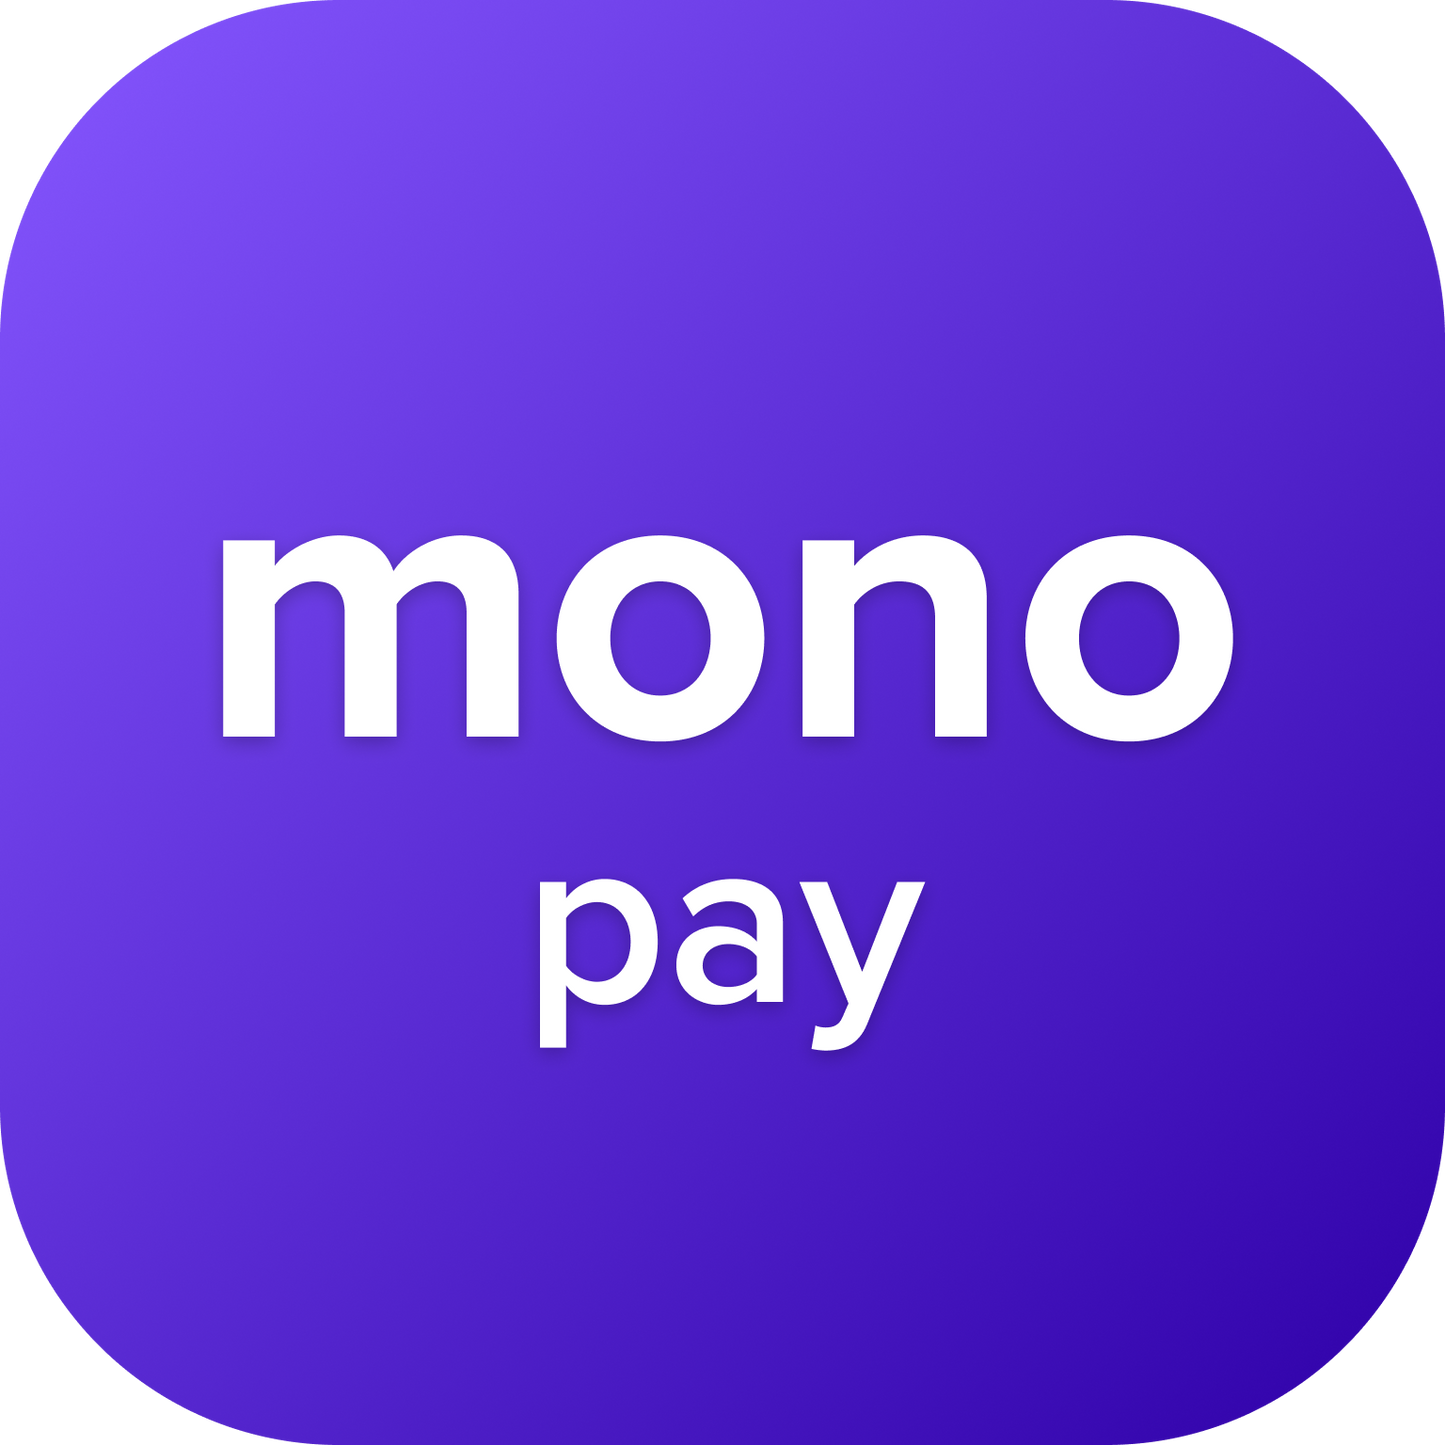 Integration of the mono pay payment gateway from monobank into the Shopify store